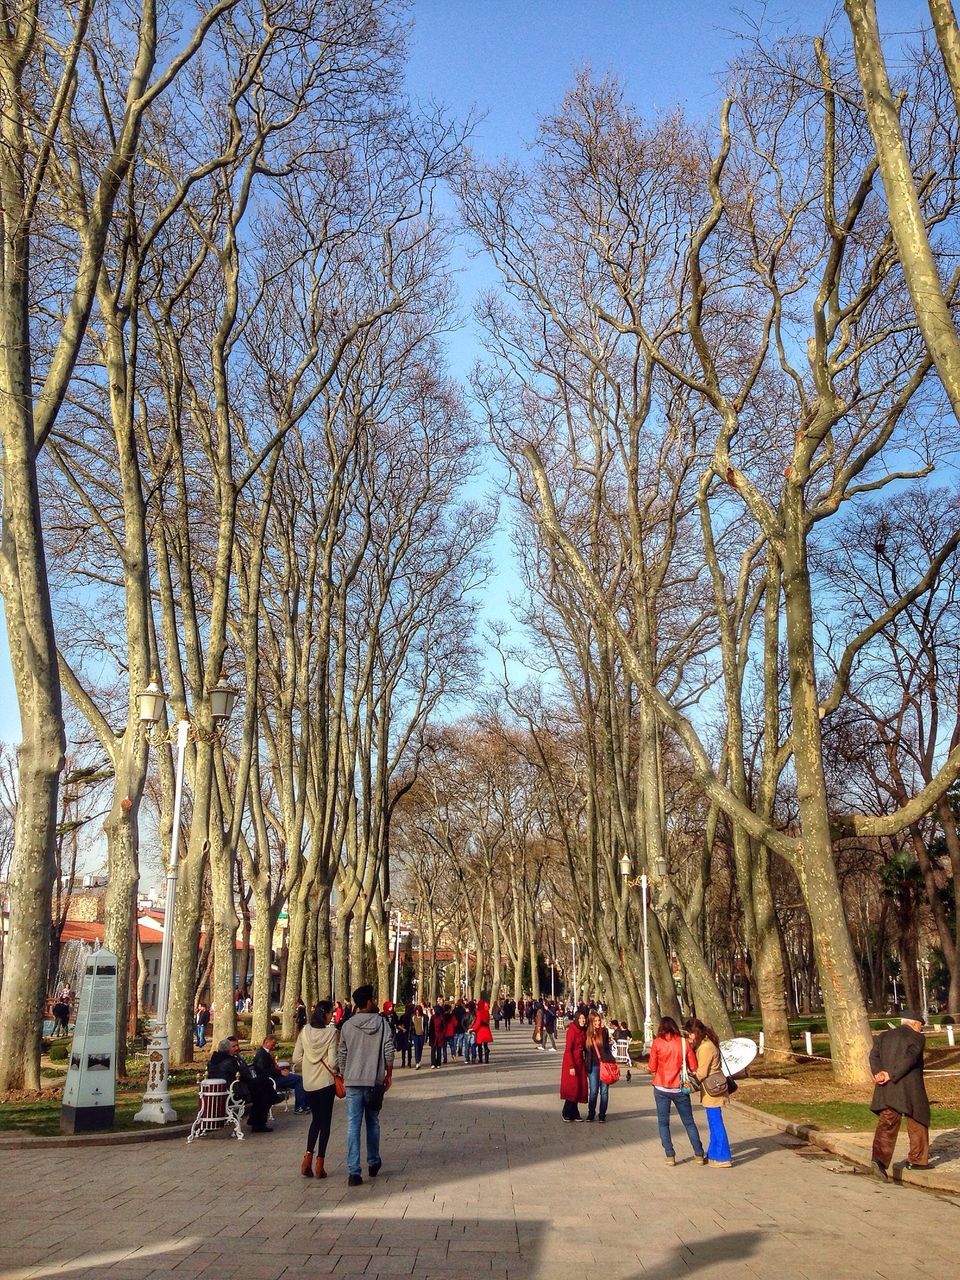 tree, large group of people, person, lifestyles, leisure activity, men, mixed age range, walking, tourist, sky, togetherness, city life, clear sky, day, park - man made space, sunlight, outdoors, travel, tourism